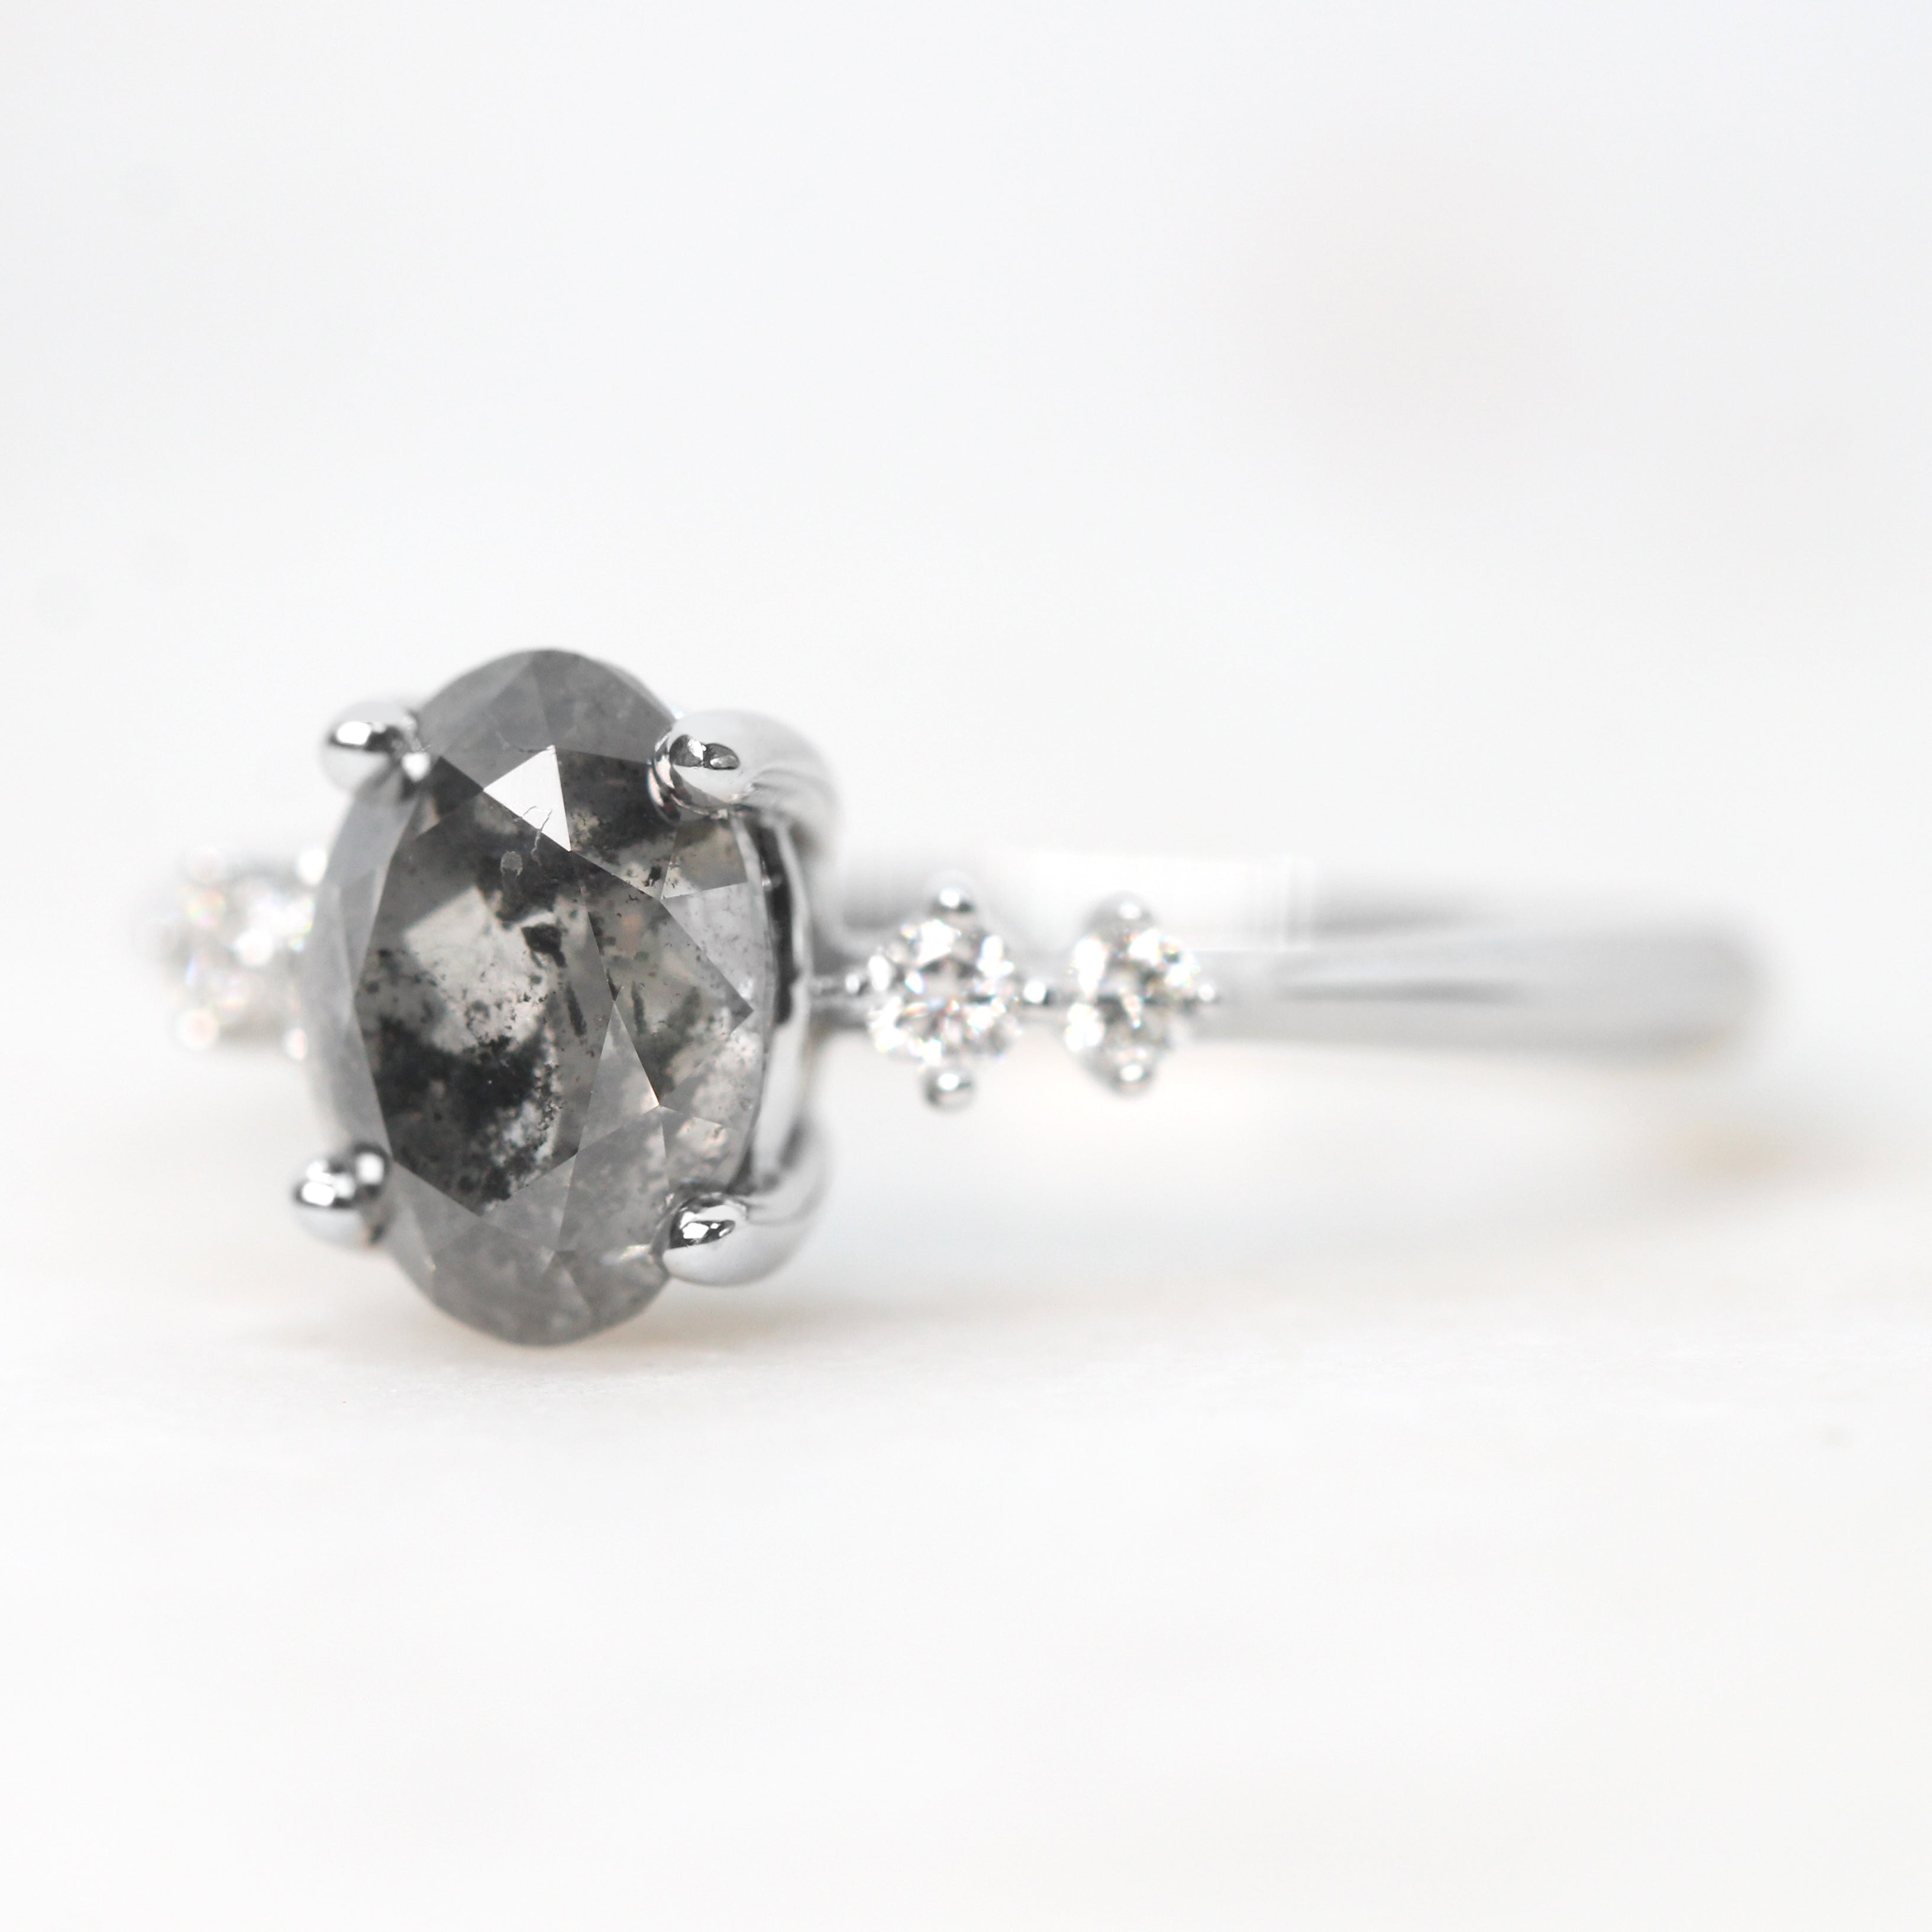 Cordelia Ring with a 1.86 Carat Dark Gray Oval Celestial Diamond and White Accent Diamonds in 14k White Gold - Ready to Size and Ship - Midwinter Co. Alternative Bridal Rings and Modern Fine Jewelry